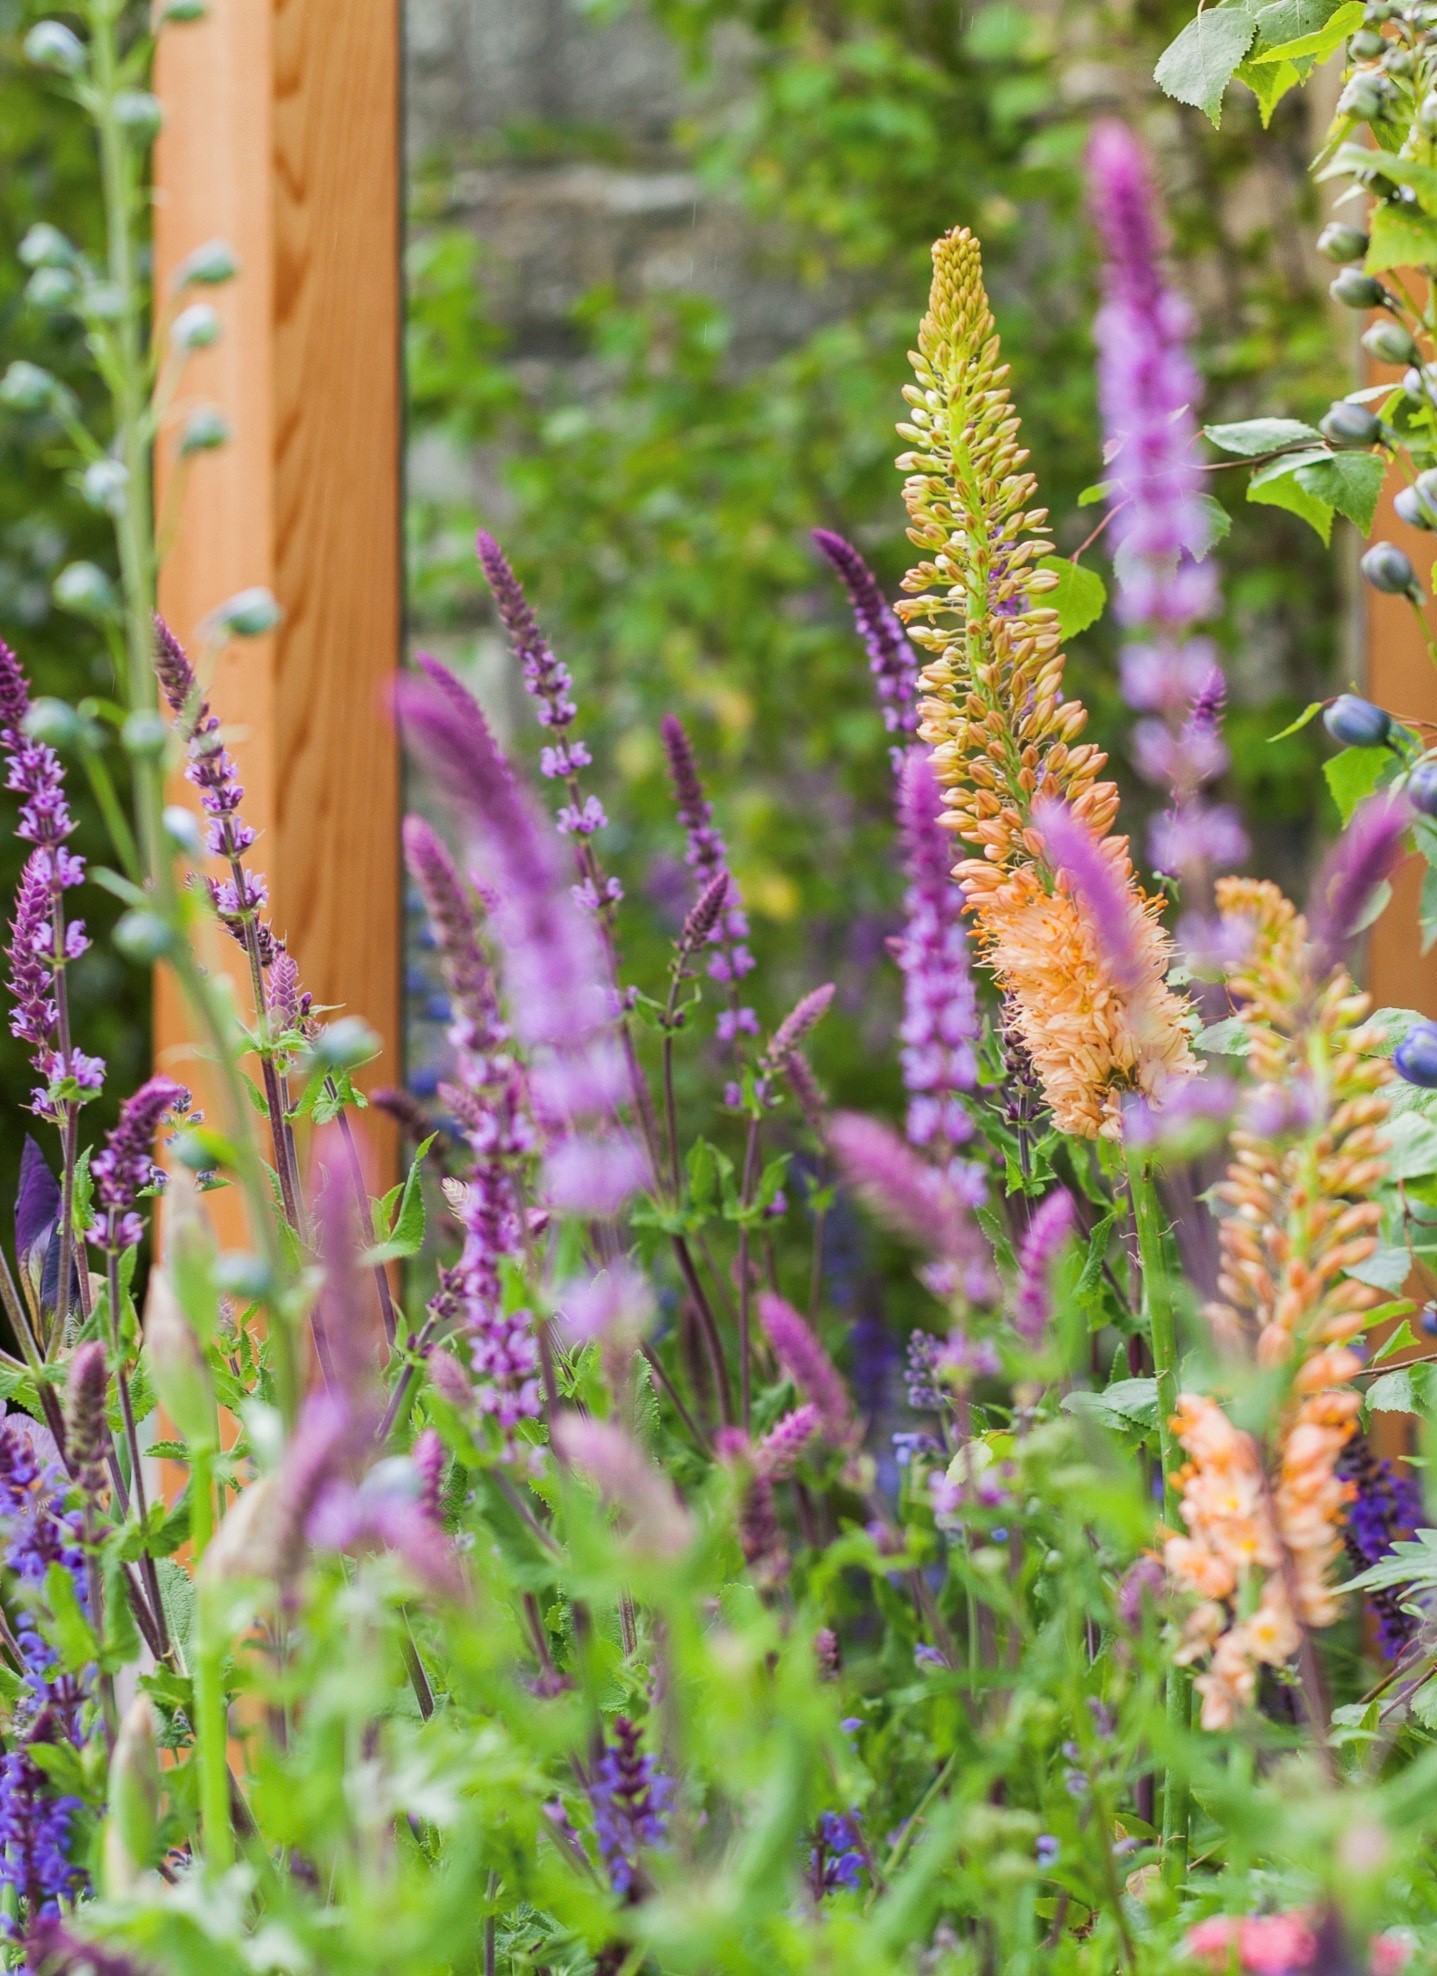 Award-winning garden designer Leonie Cornelius shares her top tips for creating a garden space that you'll love being in